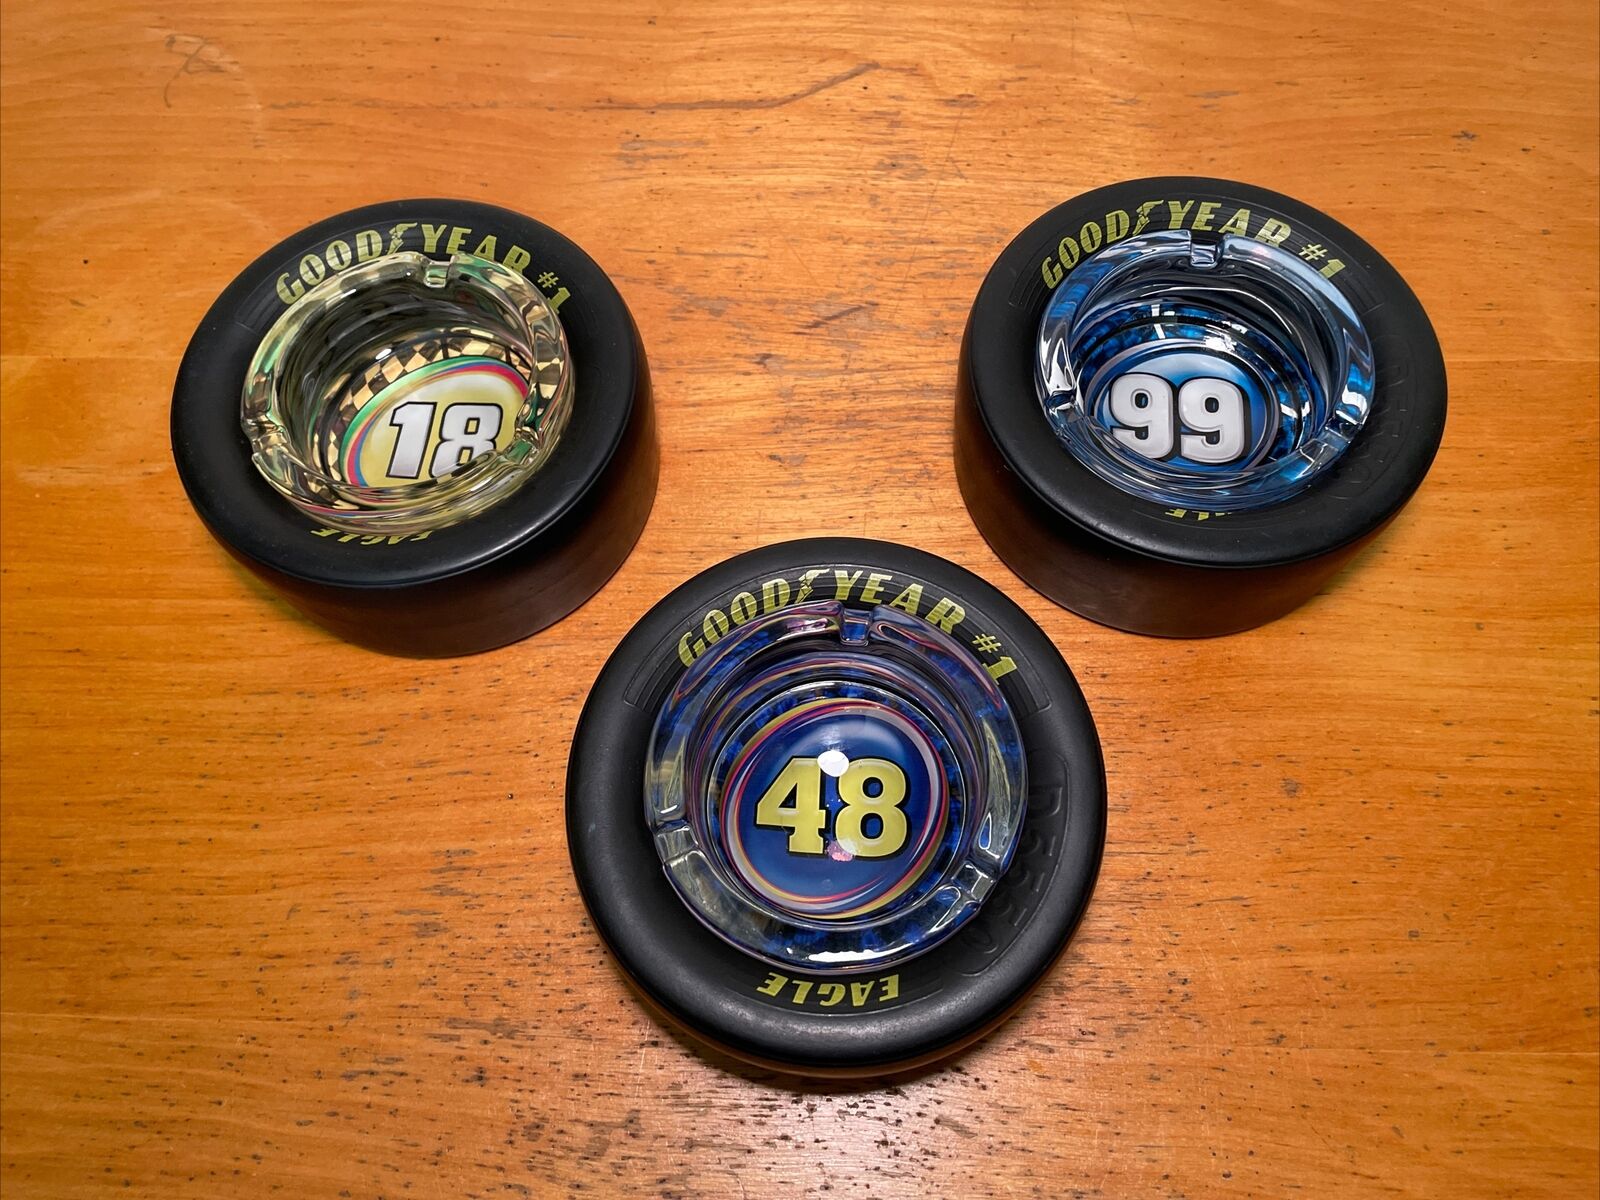 Goodyear Eagle Rubber Tire Nascar Racing Glass Insert  Ashtray FotoTire Set Of 3